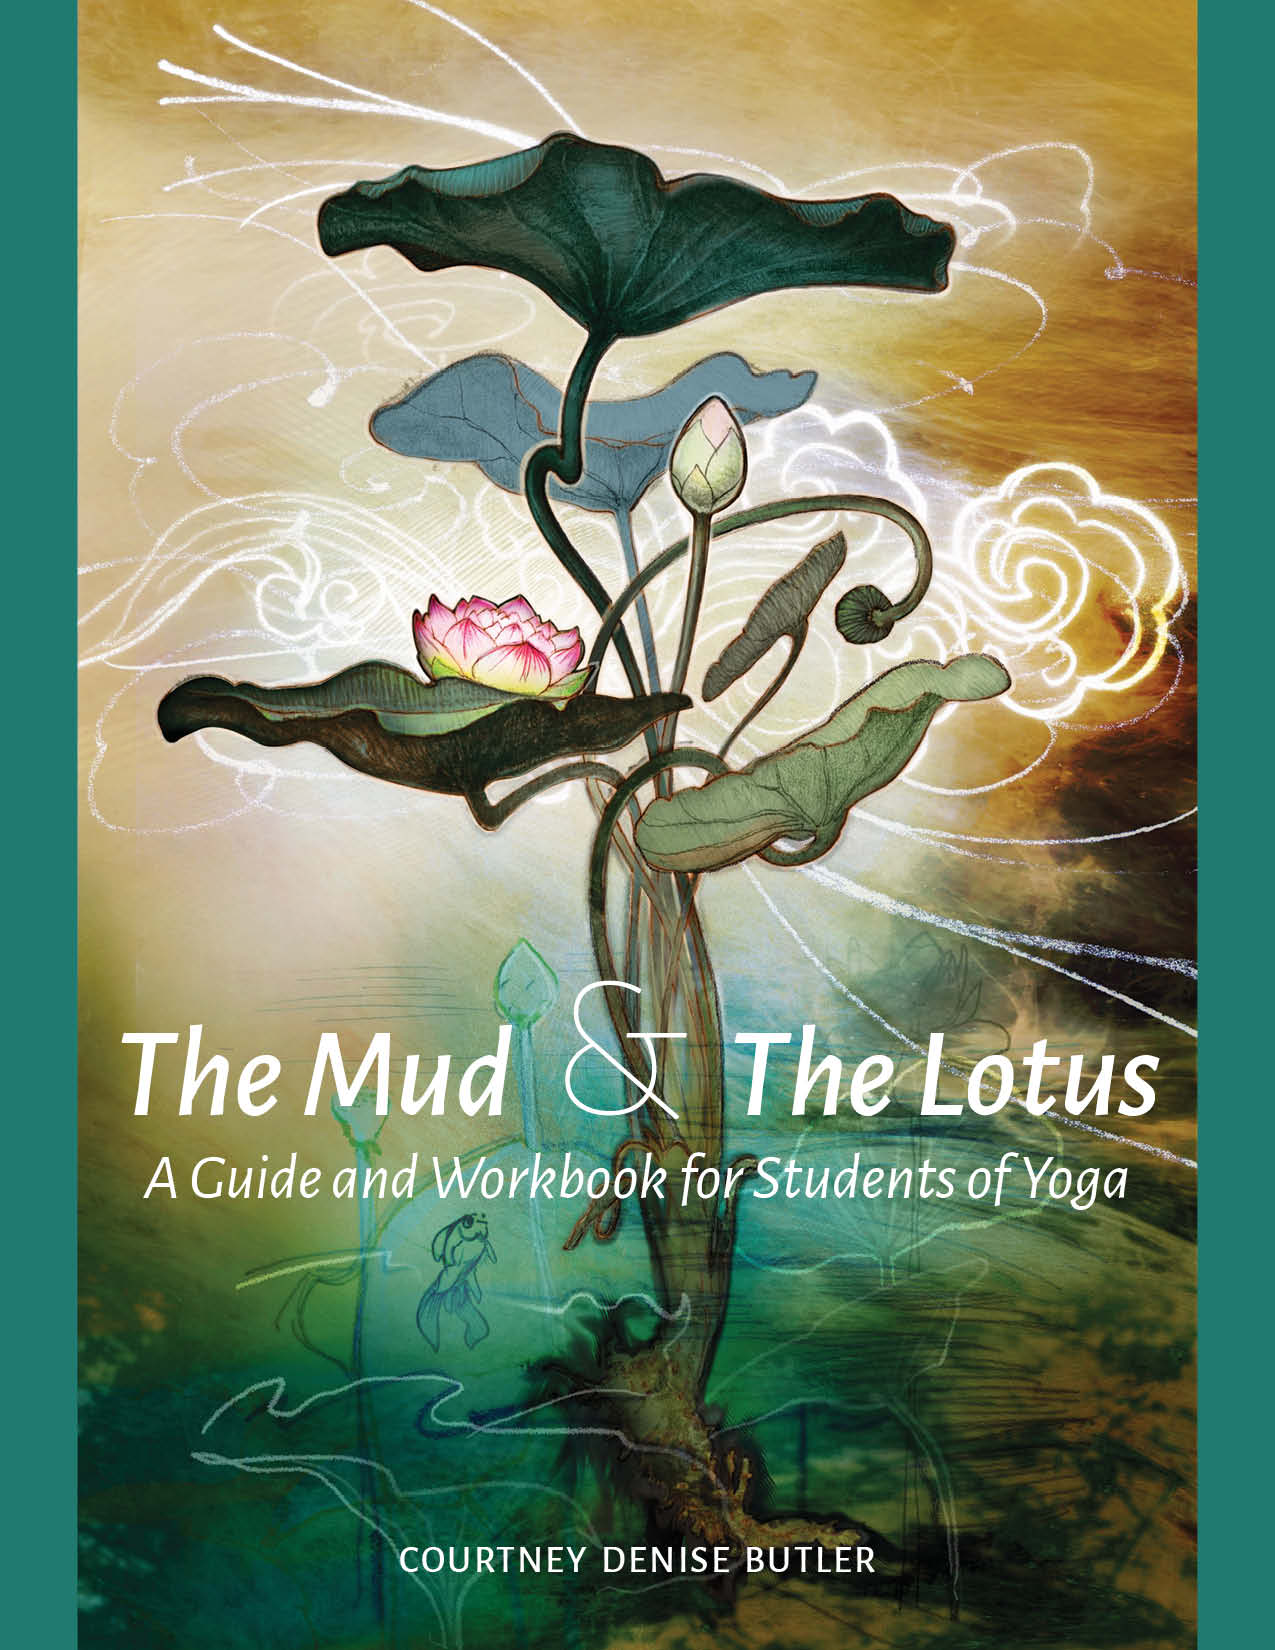 The Mud & The Lotus A Guide and Workbook for Students of